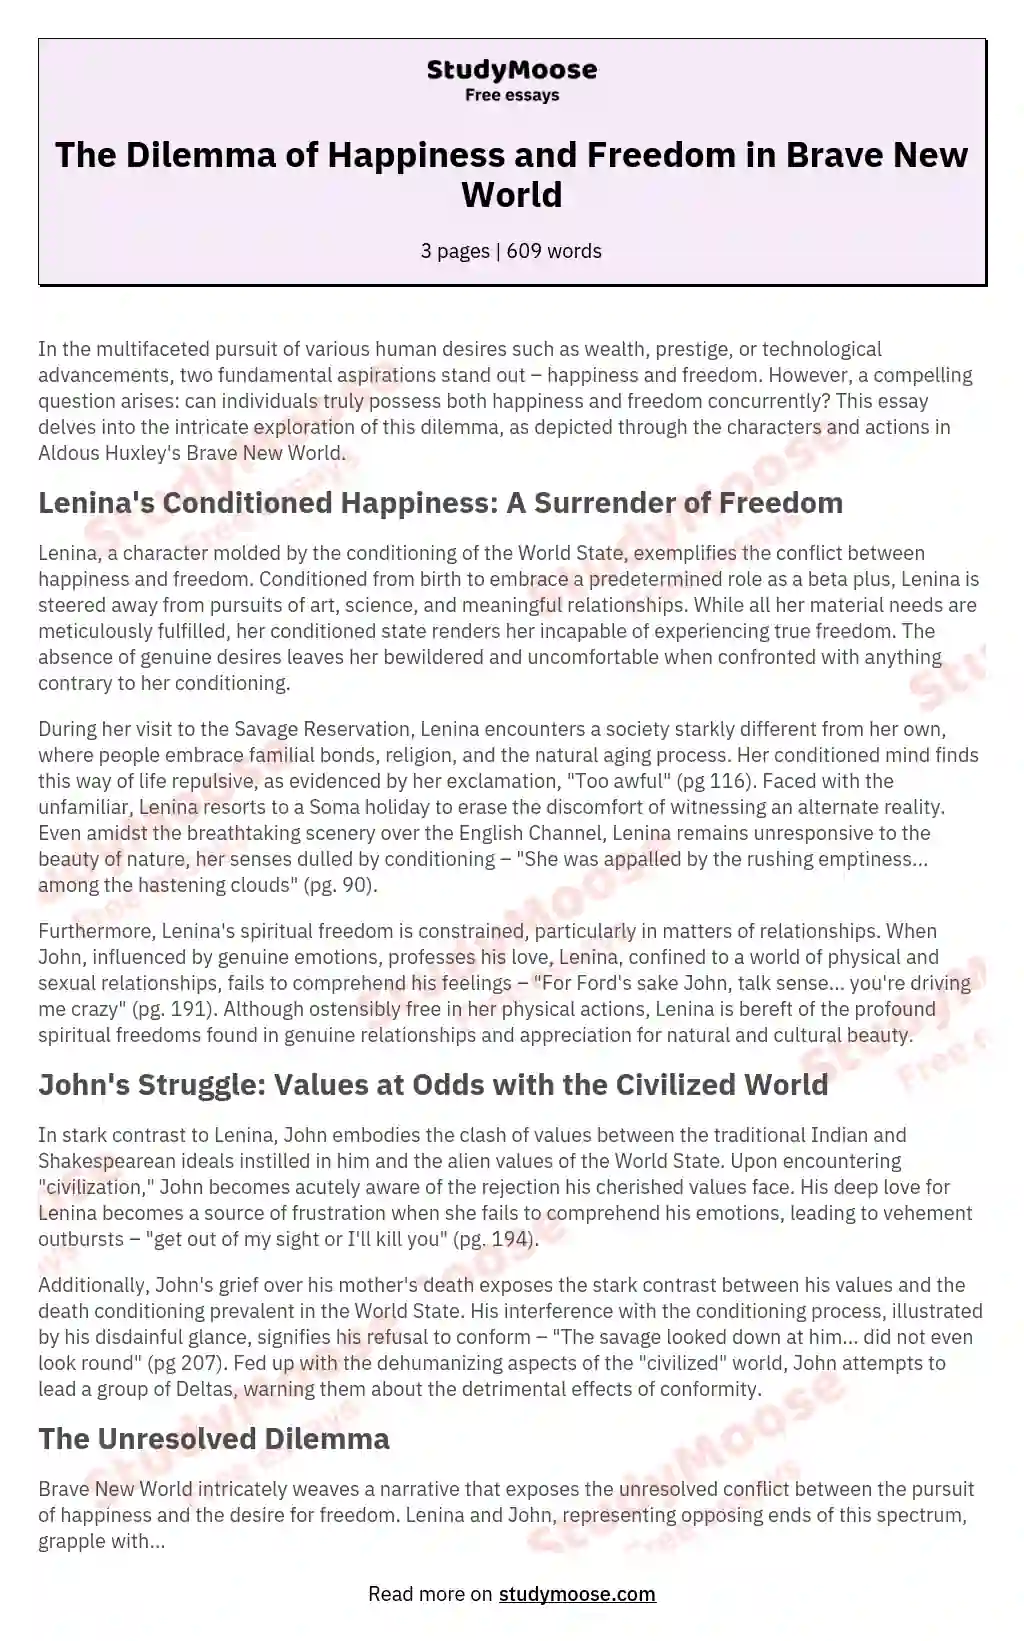 Freedom vs Happiness in Brave New World